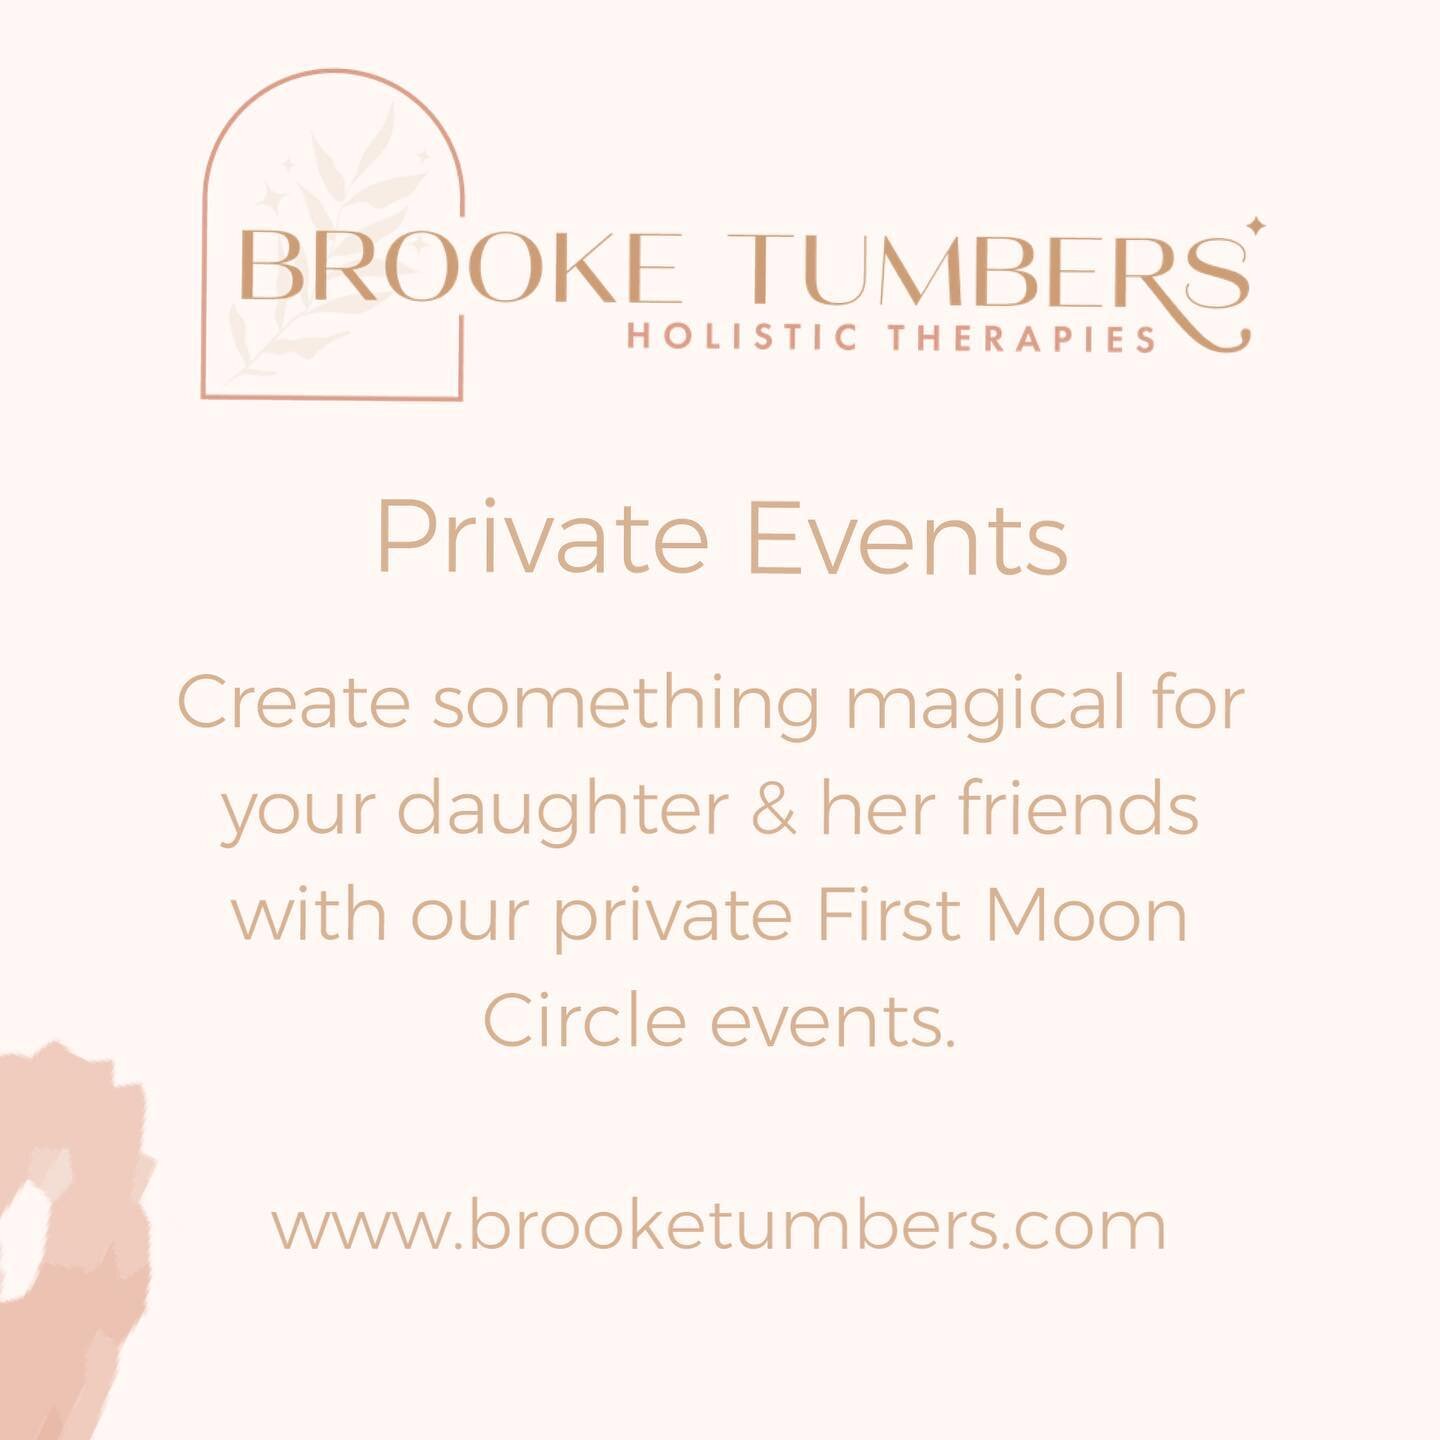 ✨ Private Events ✨

Create something magical for your daughter &amp; her friends with our private First Moon Circle events.

An intimate event with up to ten girls and their mothers/careers. Keeping the connection and sisterhood alive as they move th